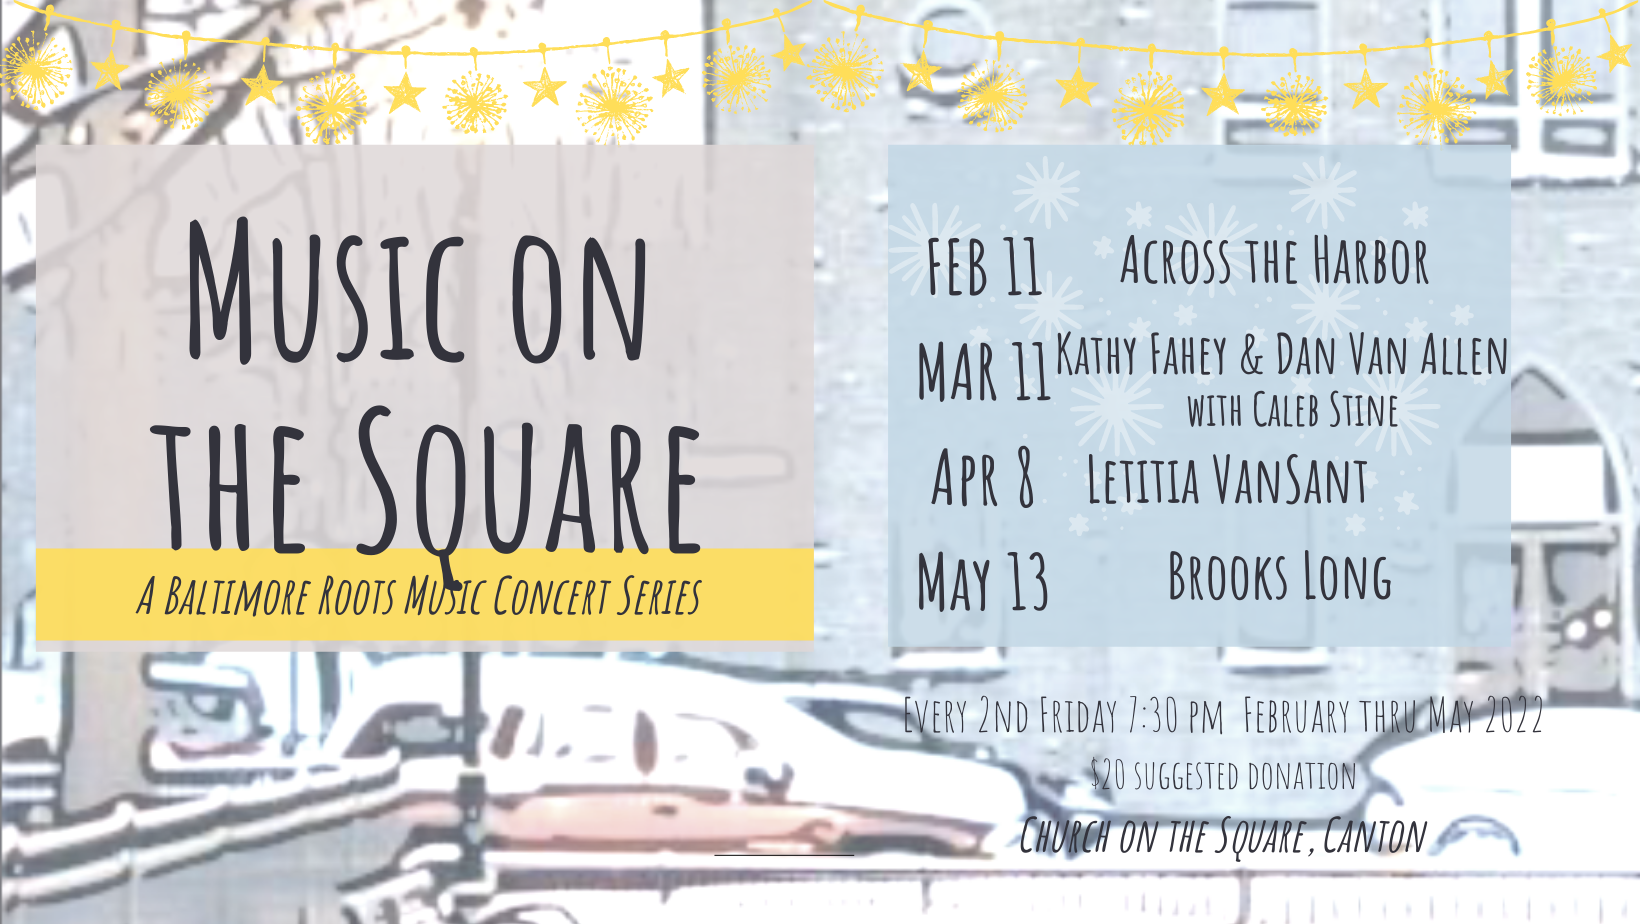 Music on the Square Concert Series returns with Across the Harbor